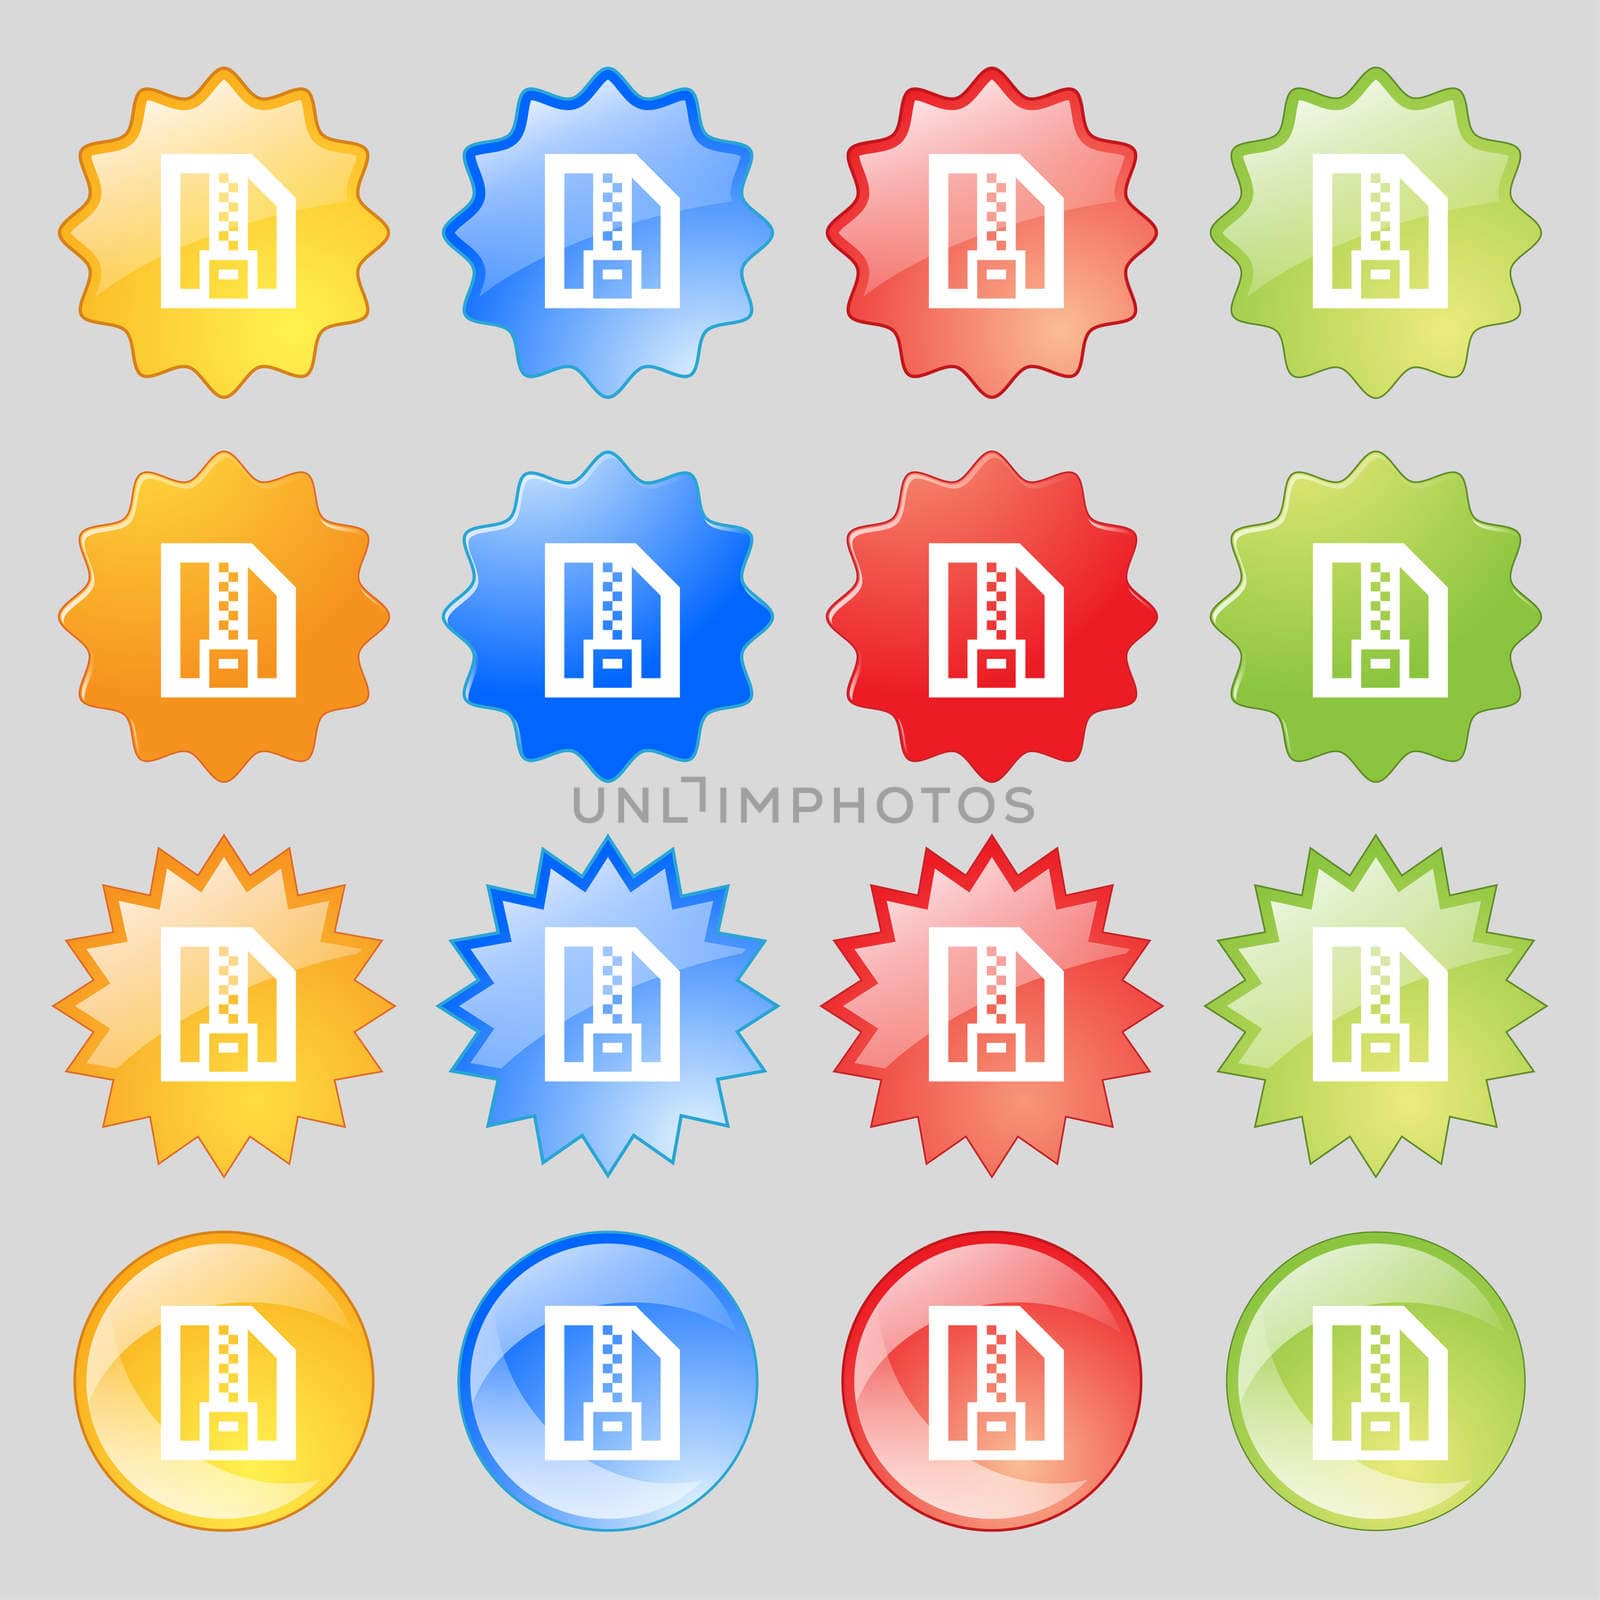 Archive file, Download compressed, ZIP zipped icon sign. Big set of 16 colorful modern buttons for your design. illustration